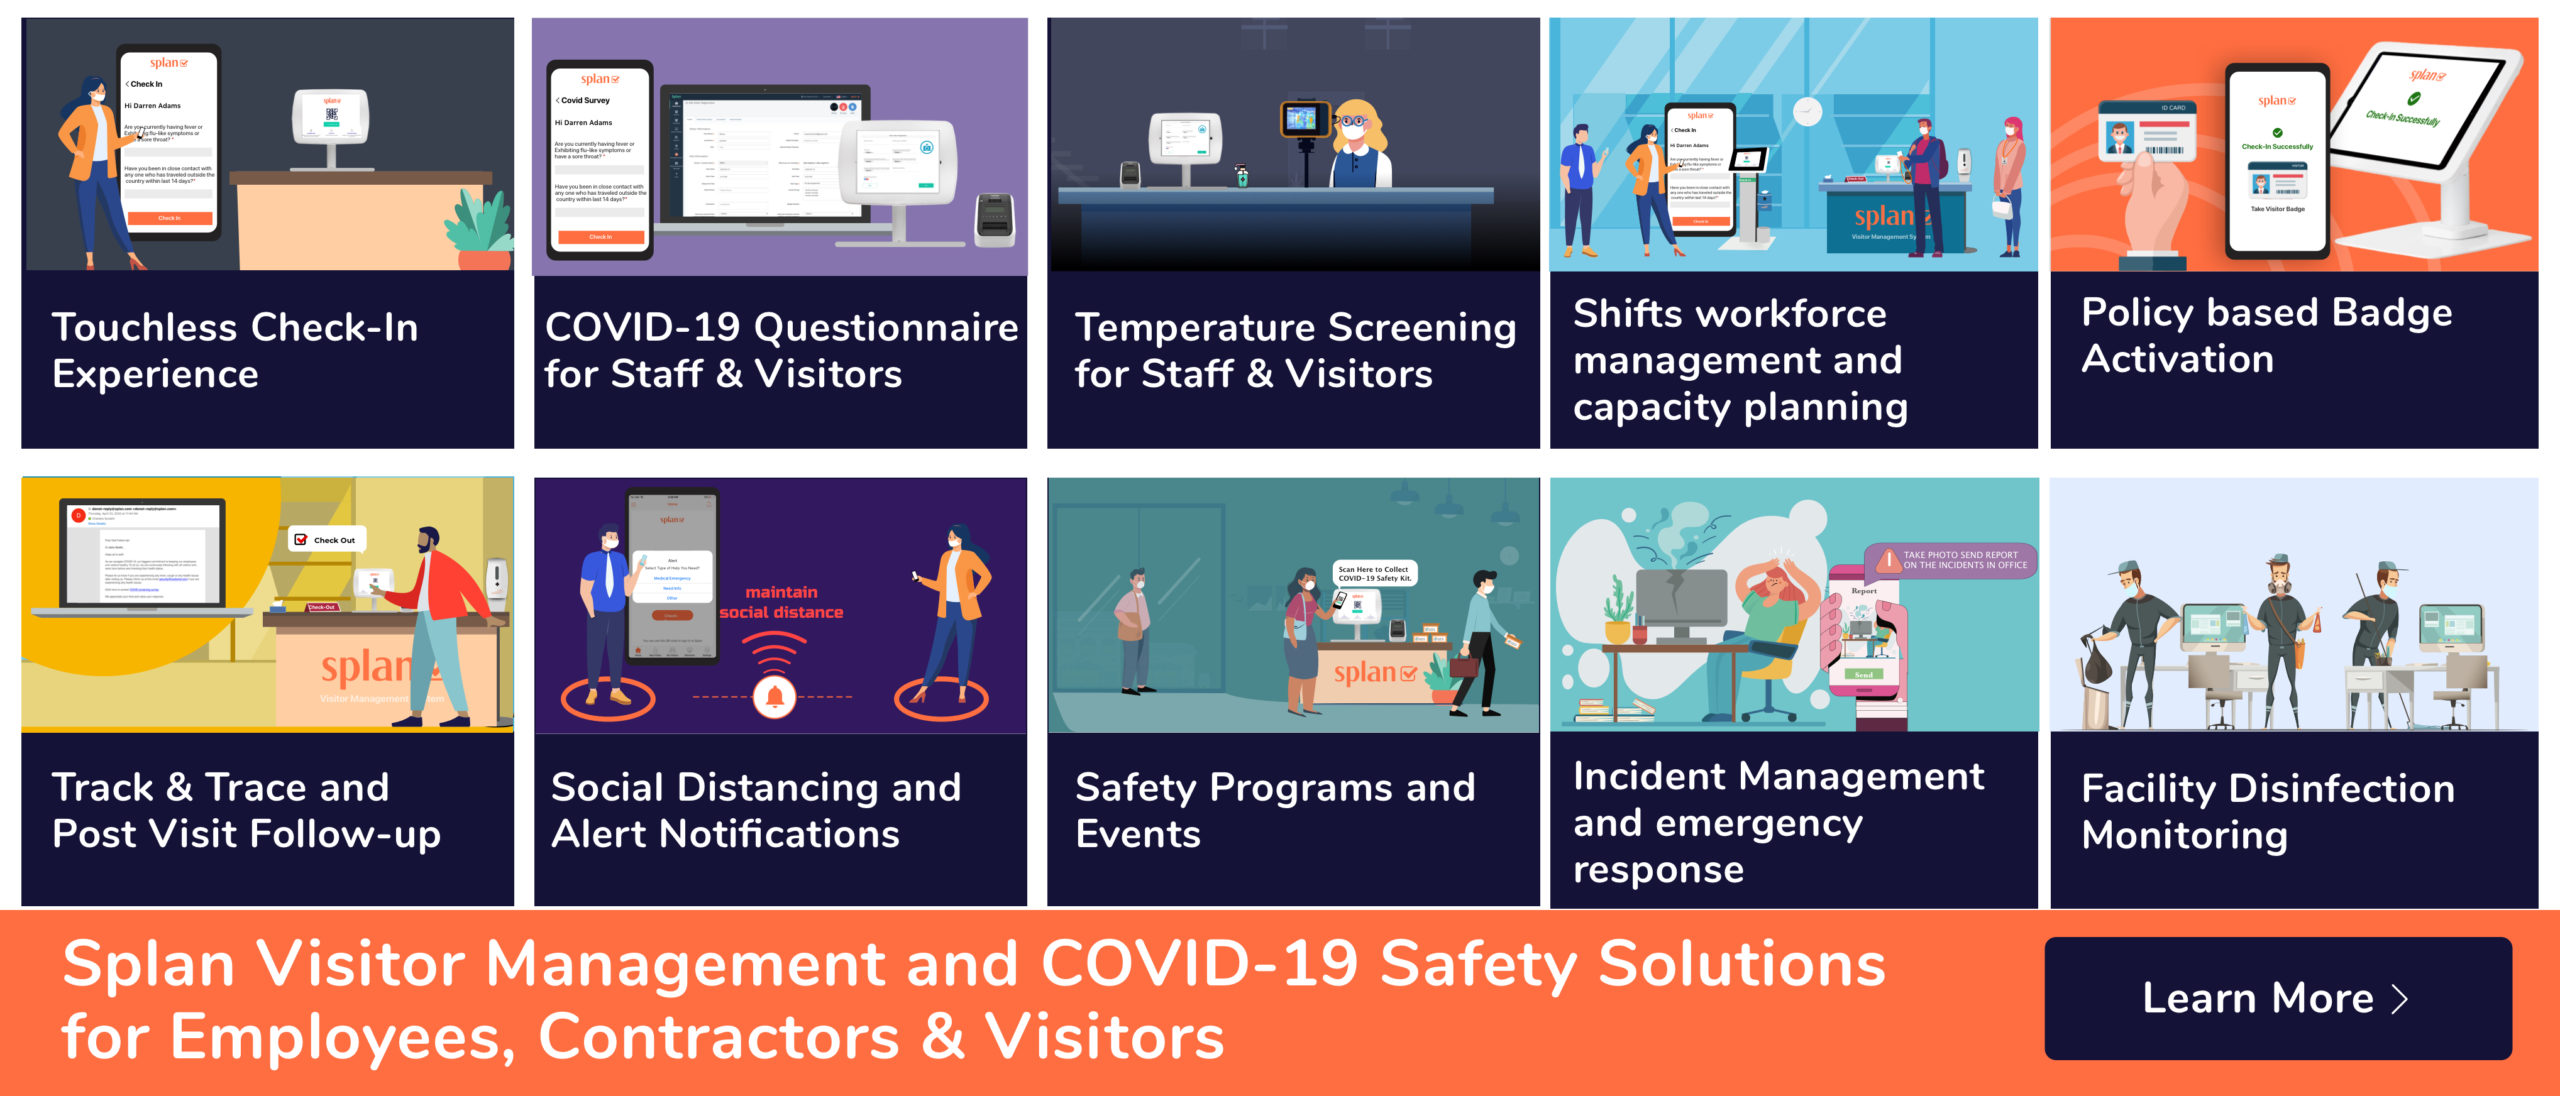 Splan has deployed its unified mobile credentialing solution and COVID-19 Safety Solutions in organizations nationwide to help create a safer environment for all.